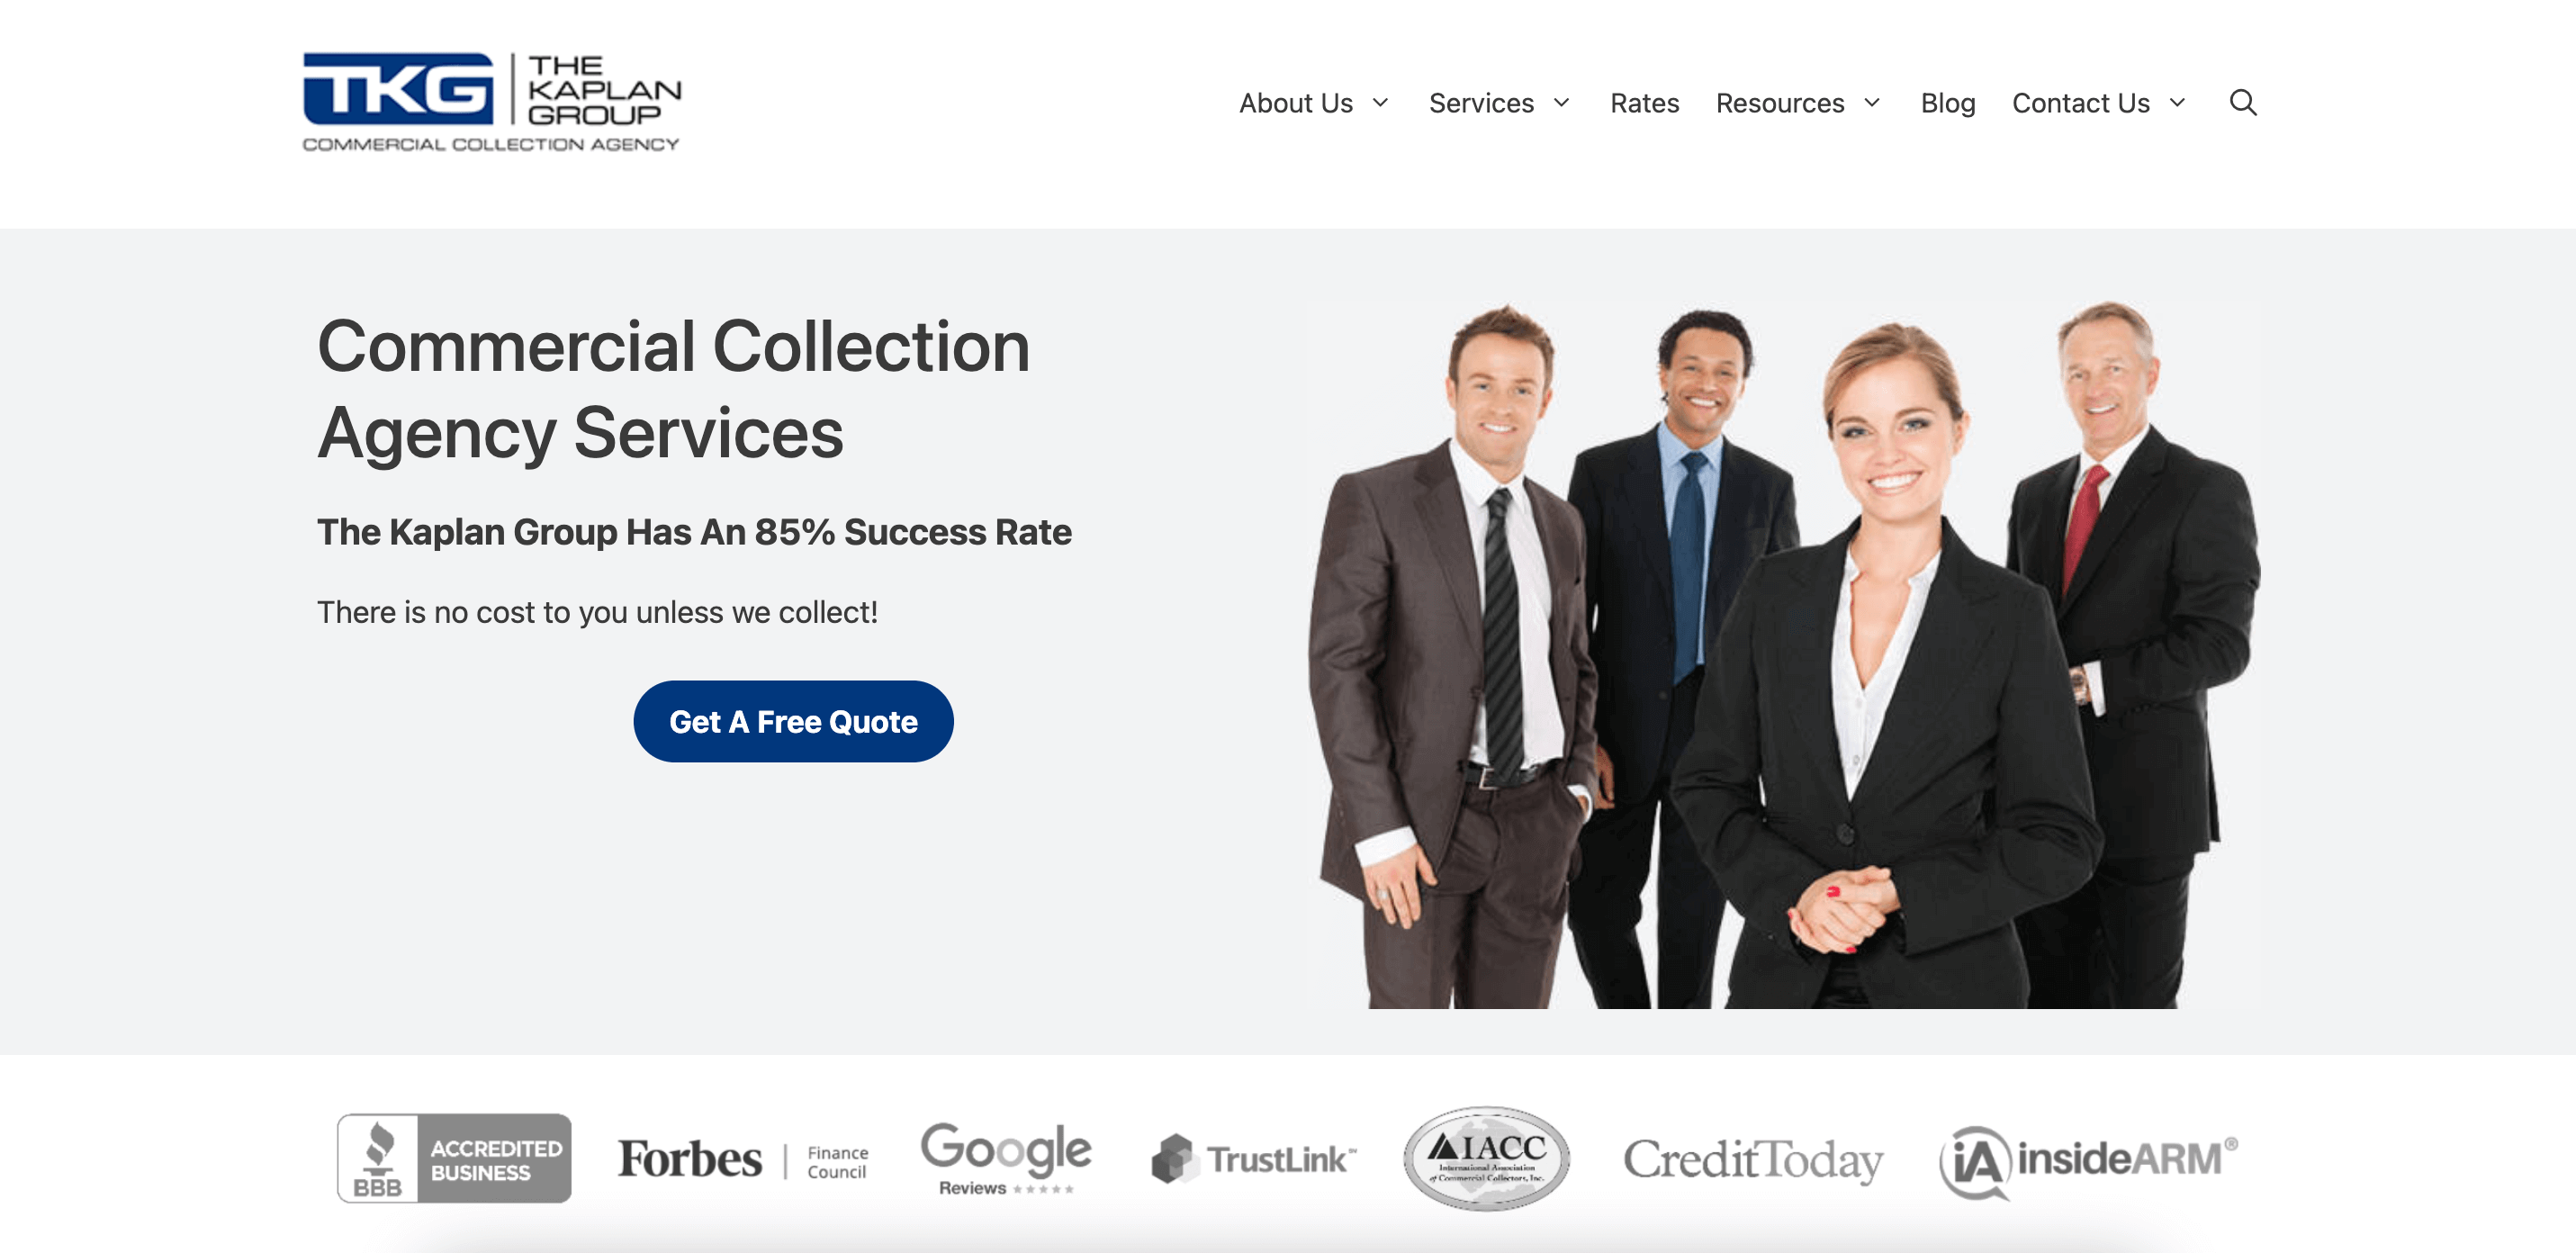 Top Debt Collection Outsourcing Services